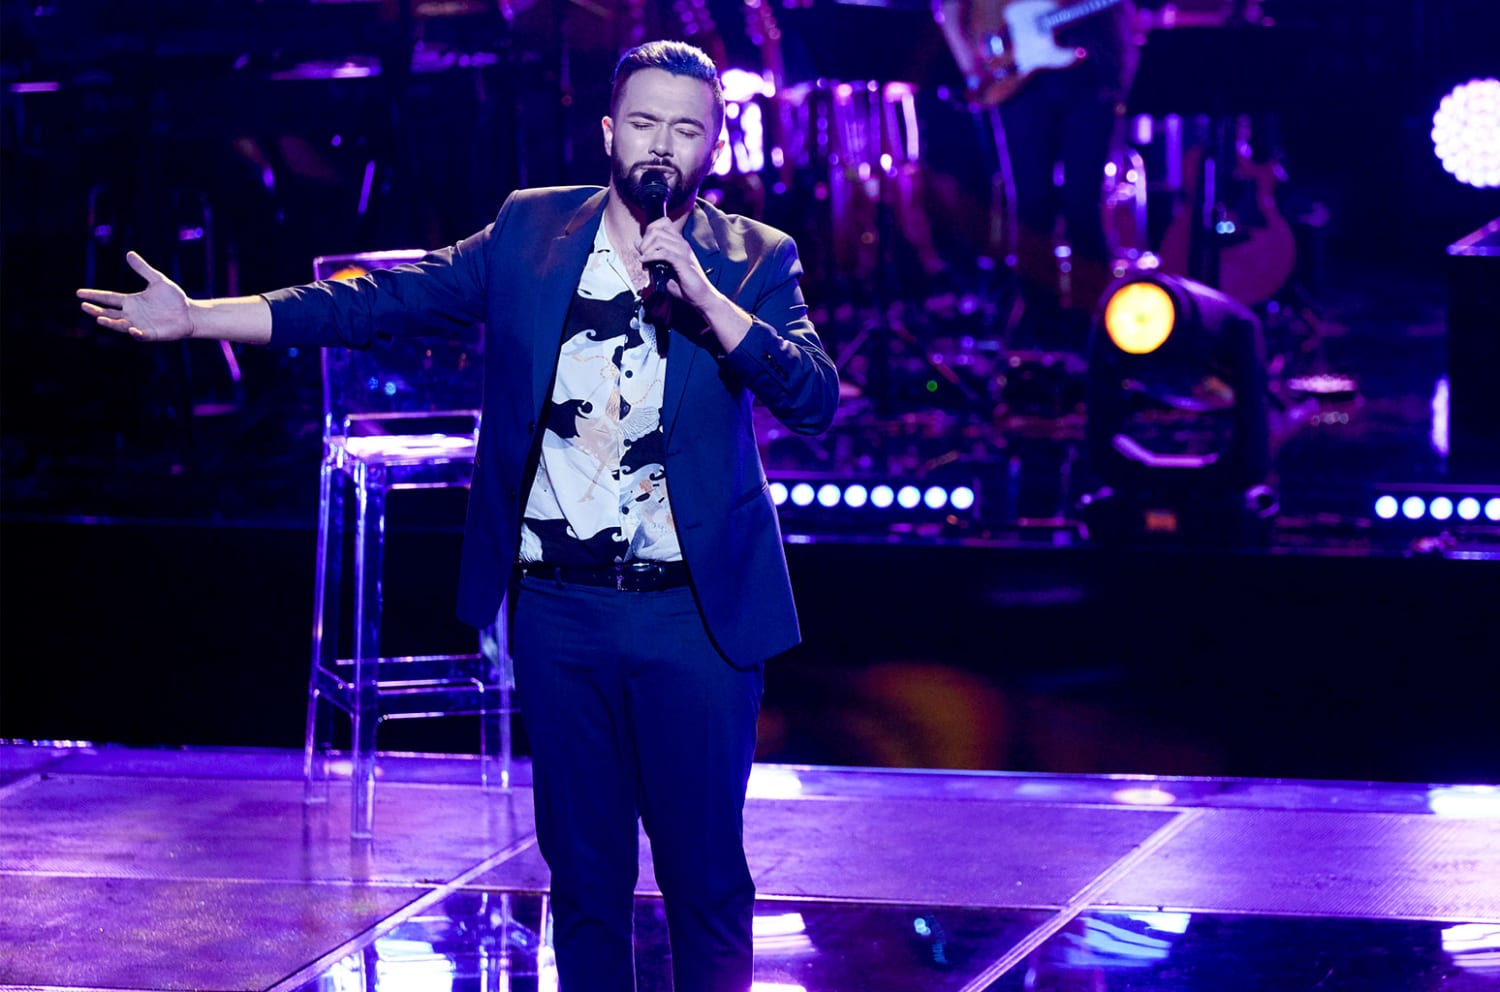 Will Breman Impresses Taylor Swift With Ed Sheeran Cover on 'The Voice': Watch